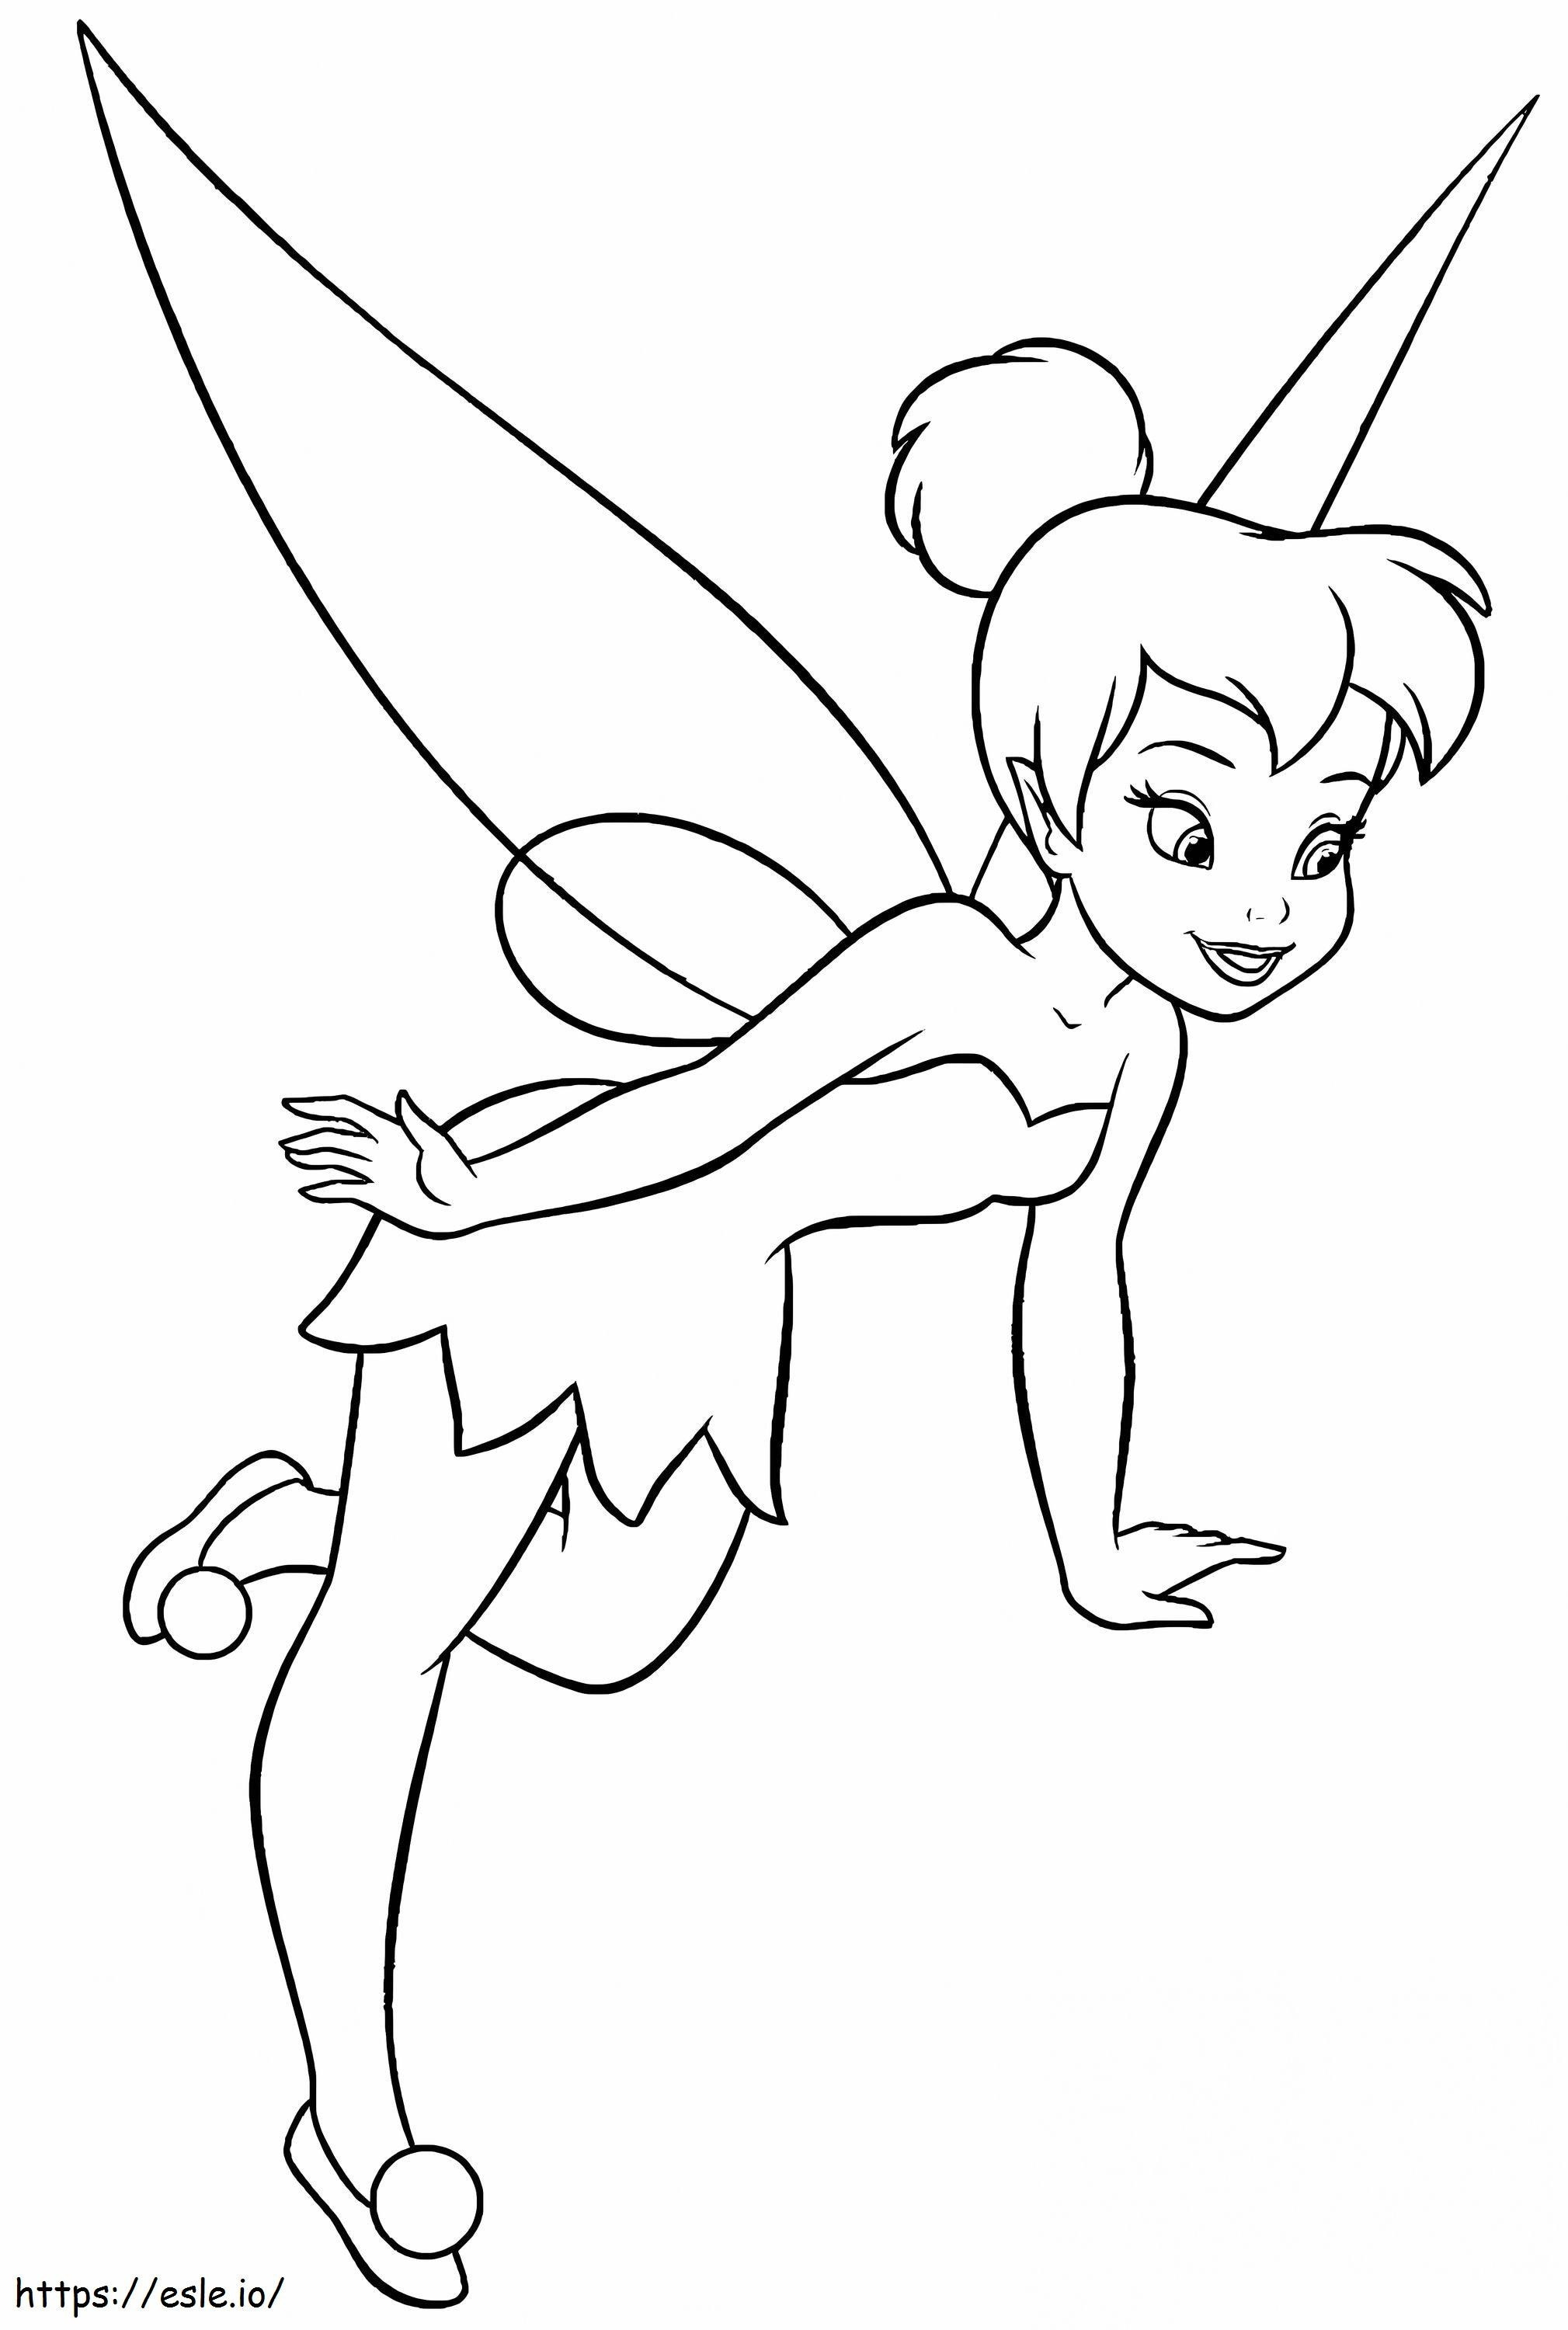 Funny Tinkerbell coloring page